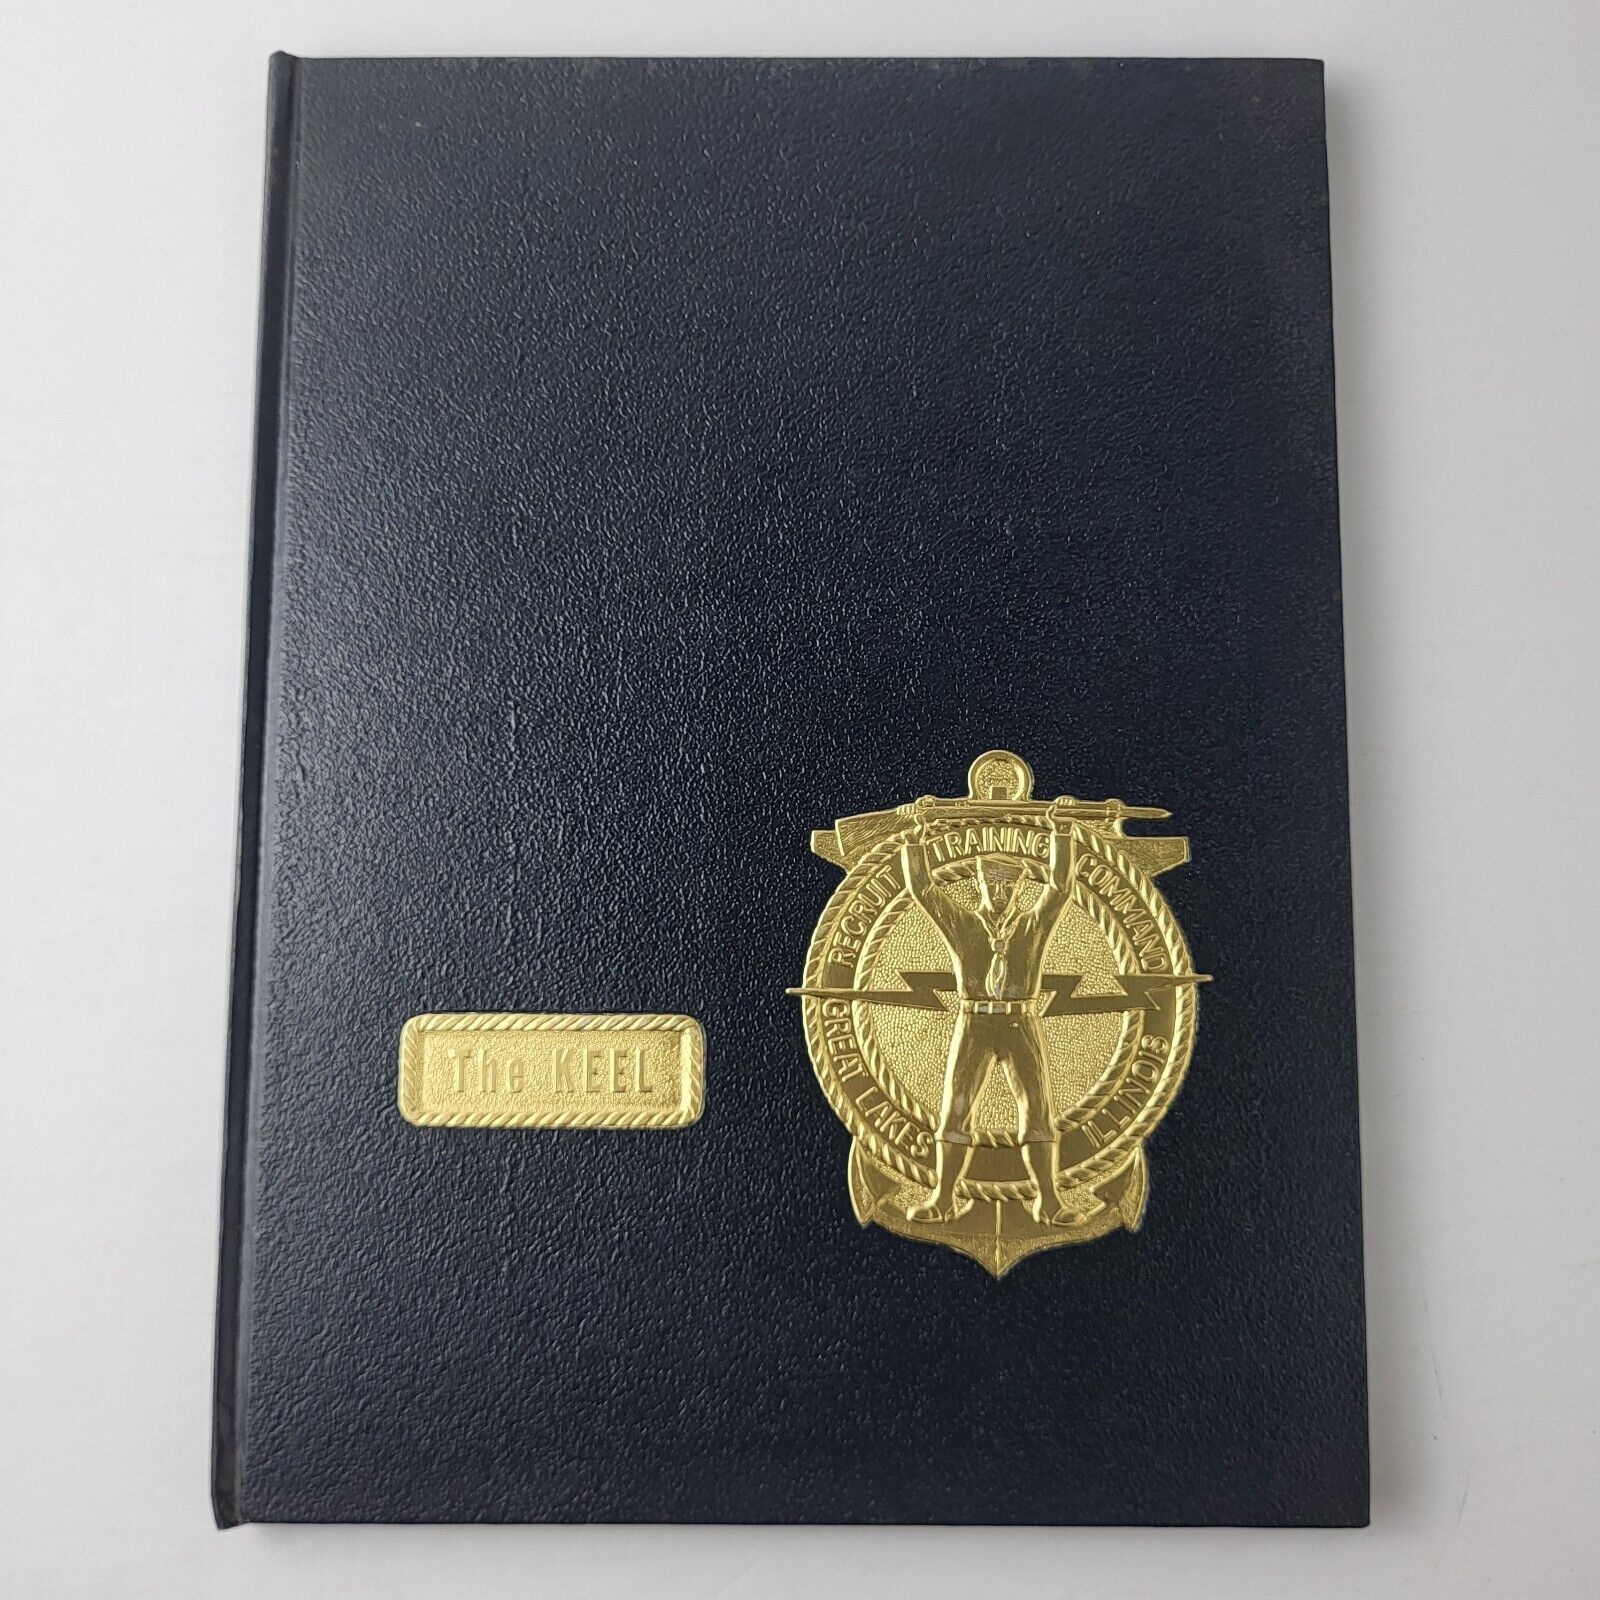 1975 The Keel Great Lakes Naval Recruit Training Command Yearbook Company 75-925